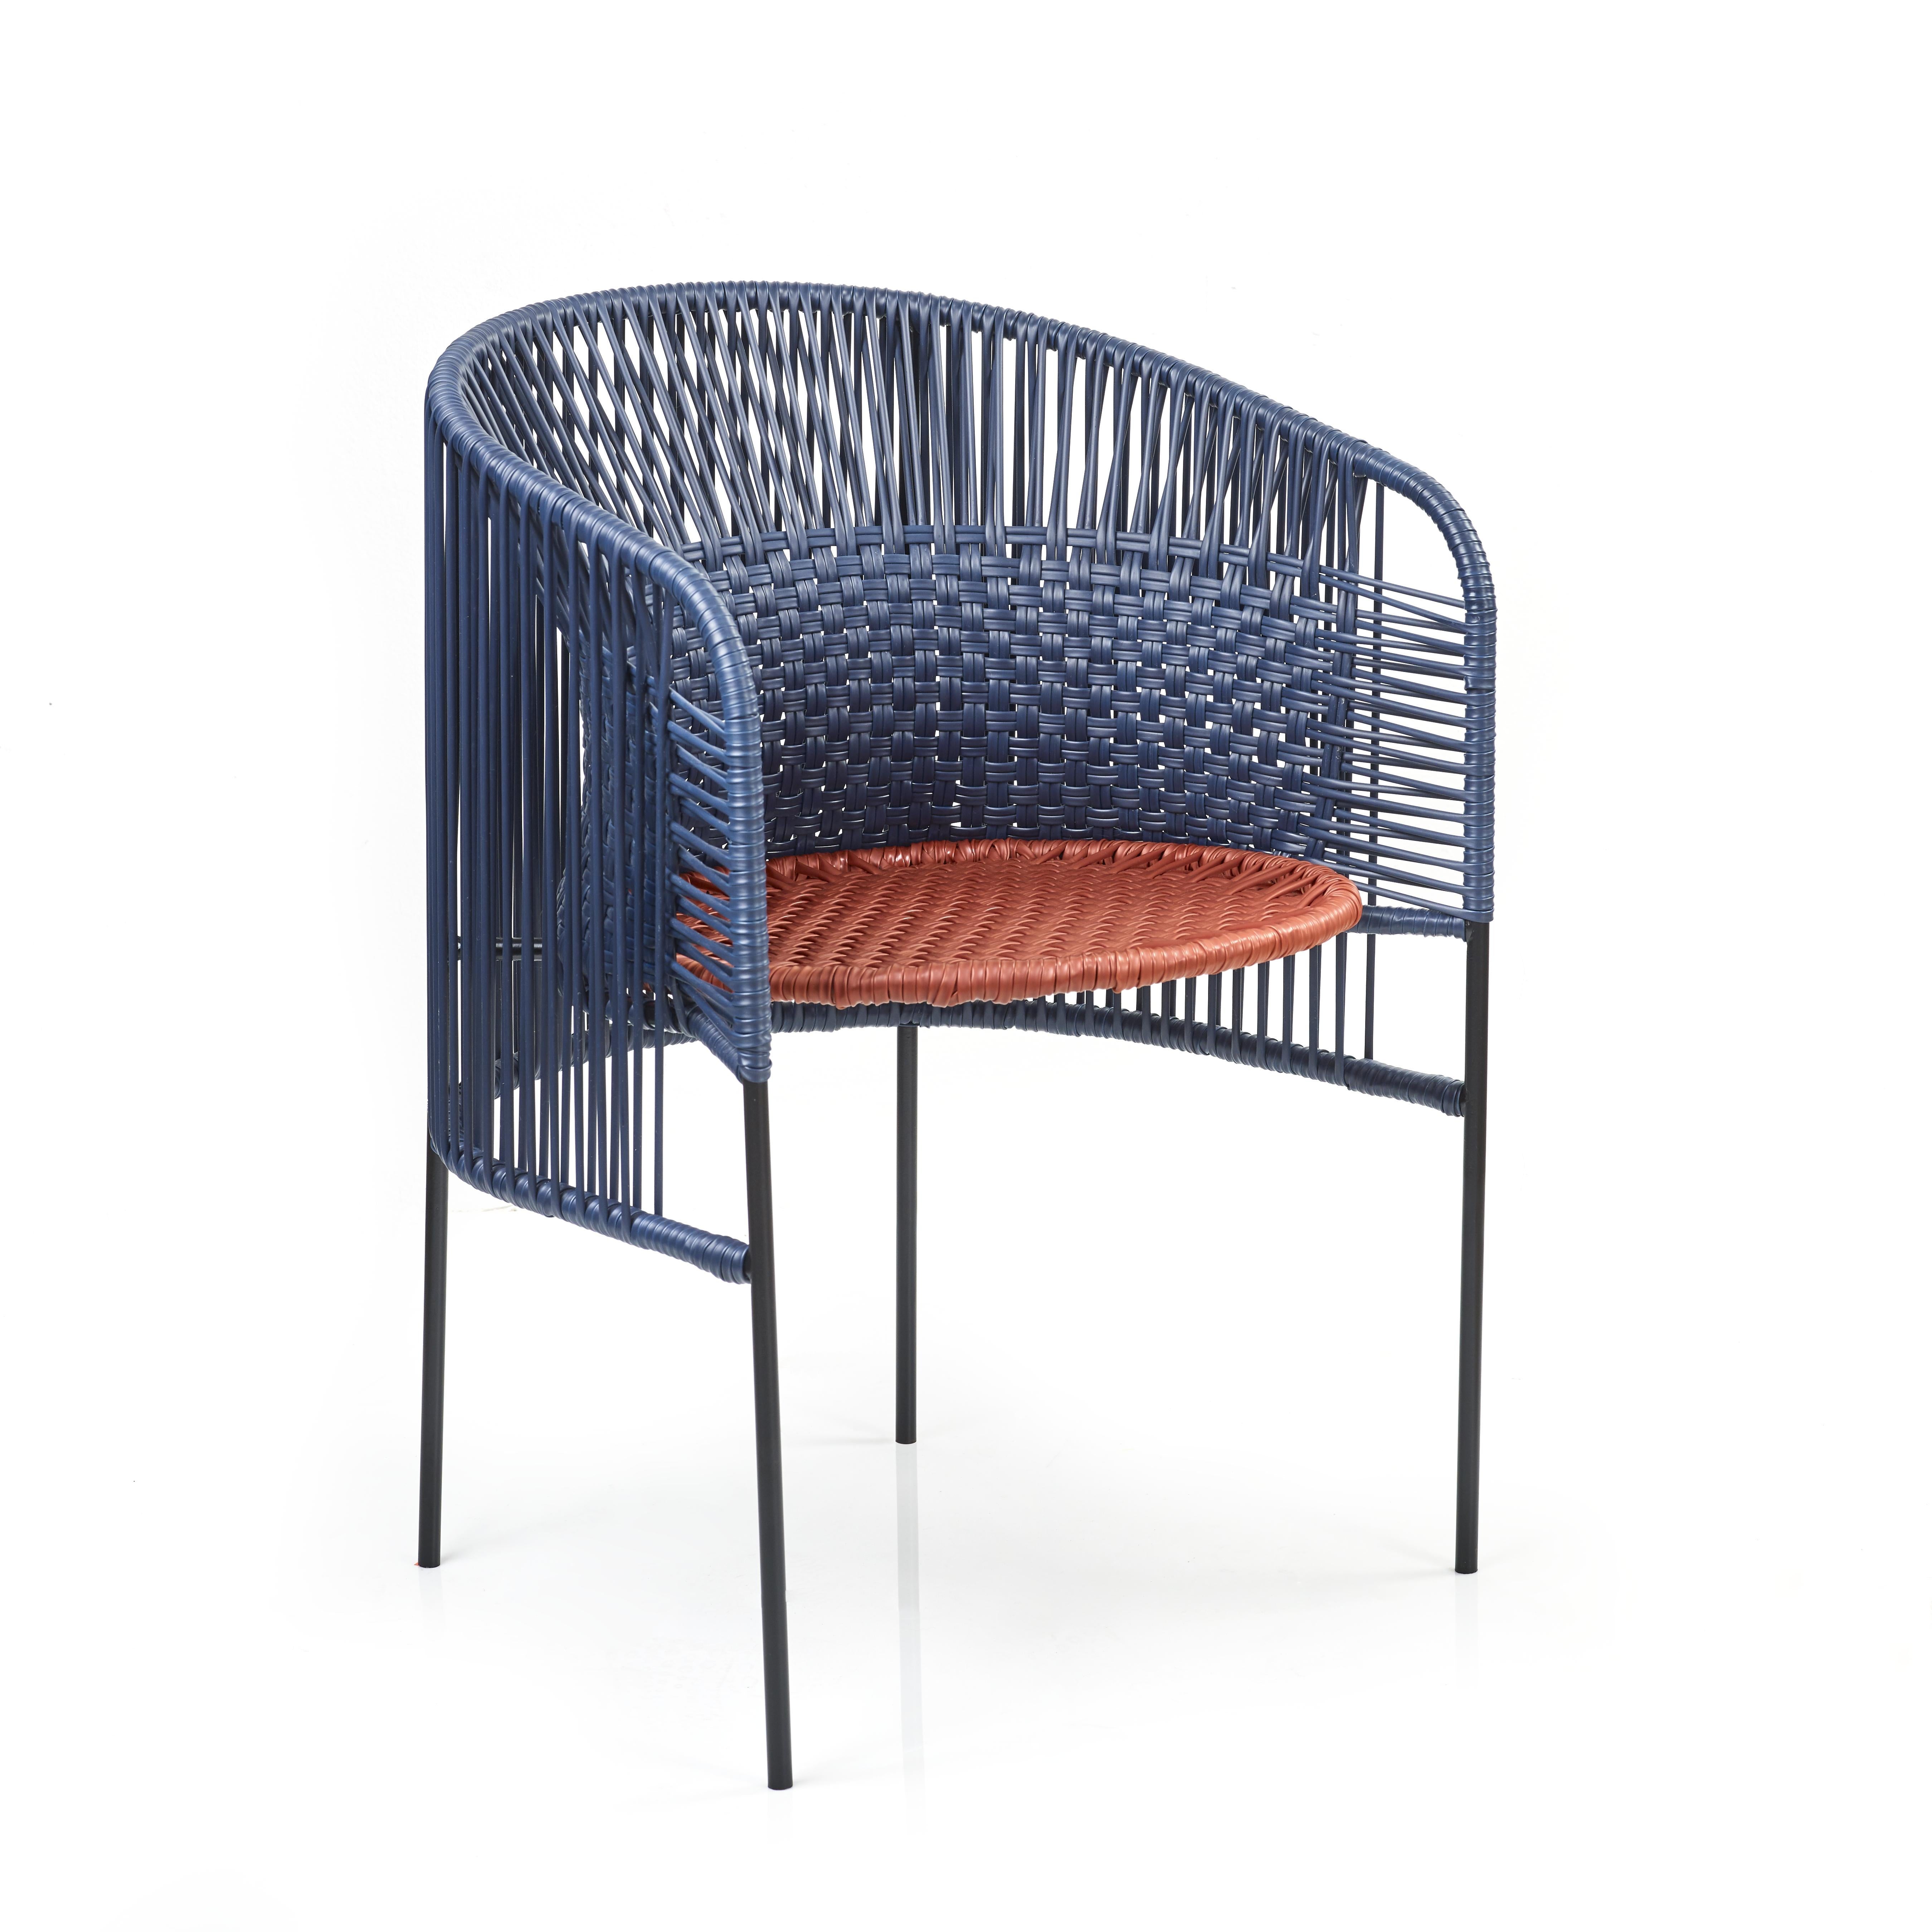 Set of 2 Blue caribe chic dining chair by Sebastian Herkner
Materials: Galvanized and powder-coated tubular steel. PVC strings are made from recycled plastic.
Technique: Made from recycled plastic and weaved by local craftspeople in Colombia.